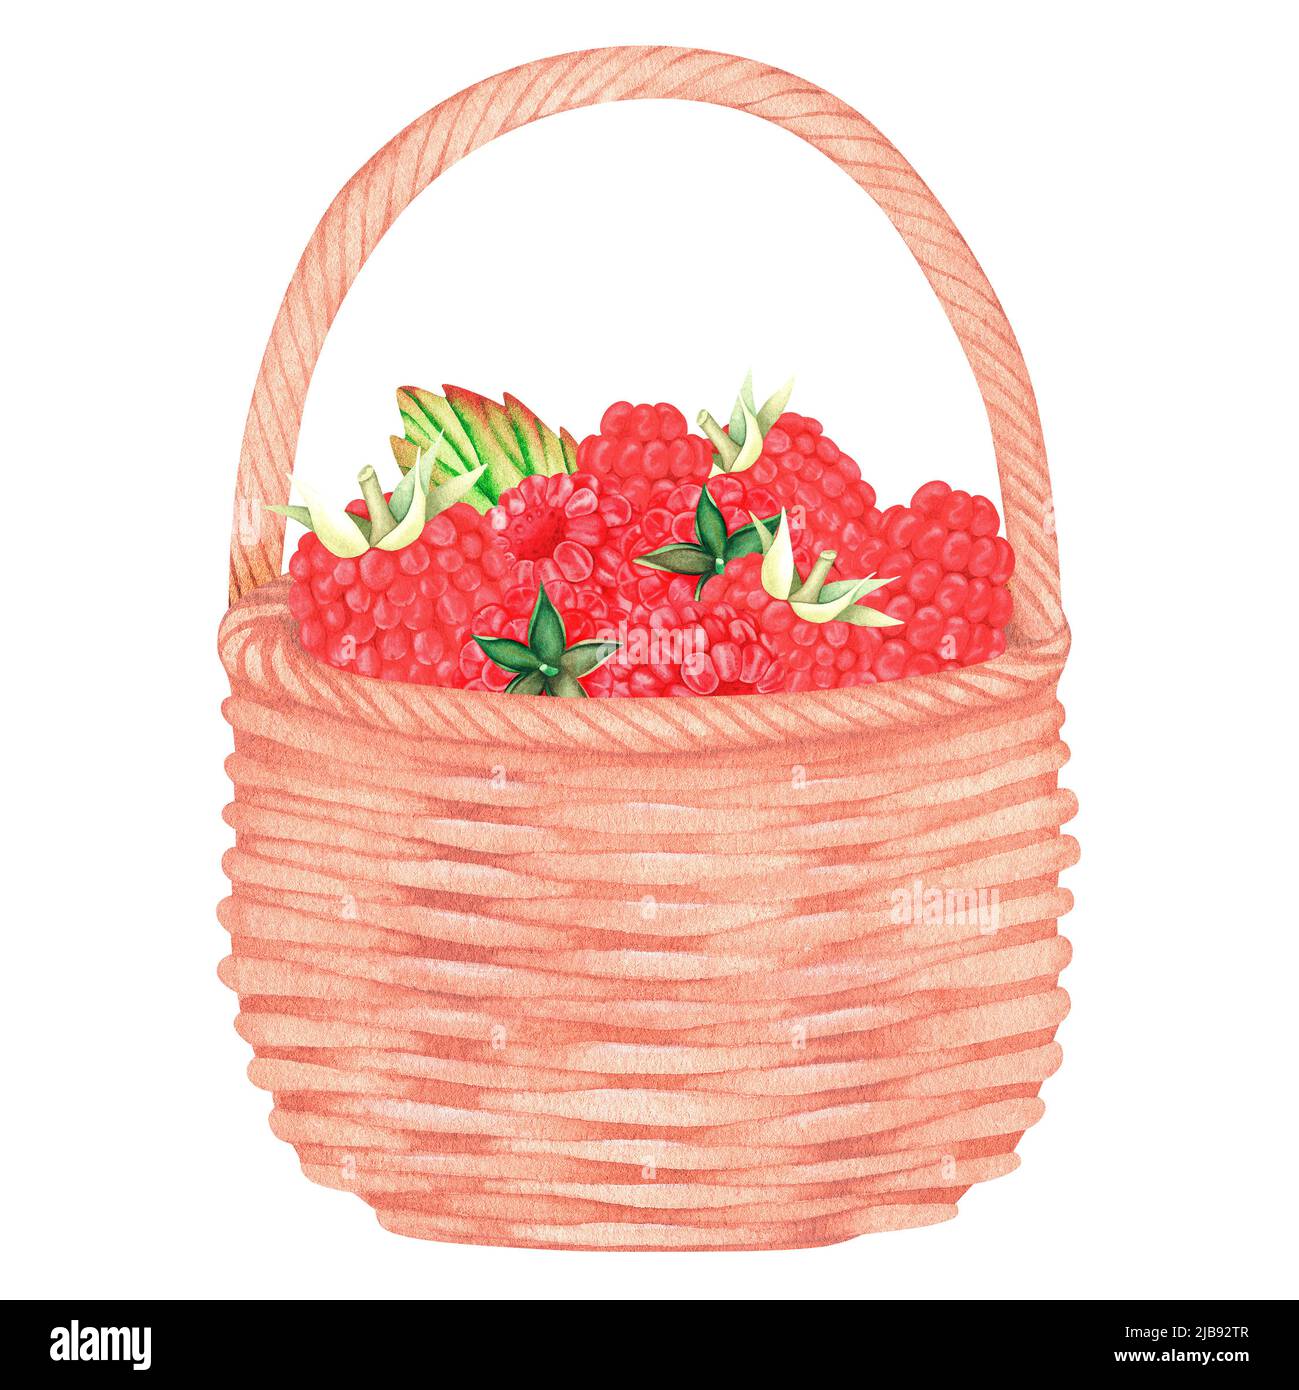 Raspberries in the basket. Watercolor illustration. Isolated on a white background. For your design. Suitable for cookbooks, recipes, aprons, kitchen Stock Photo